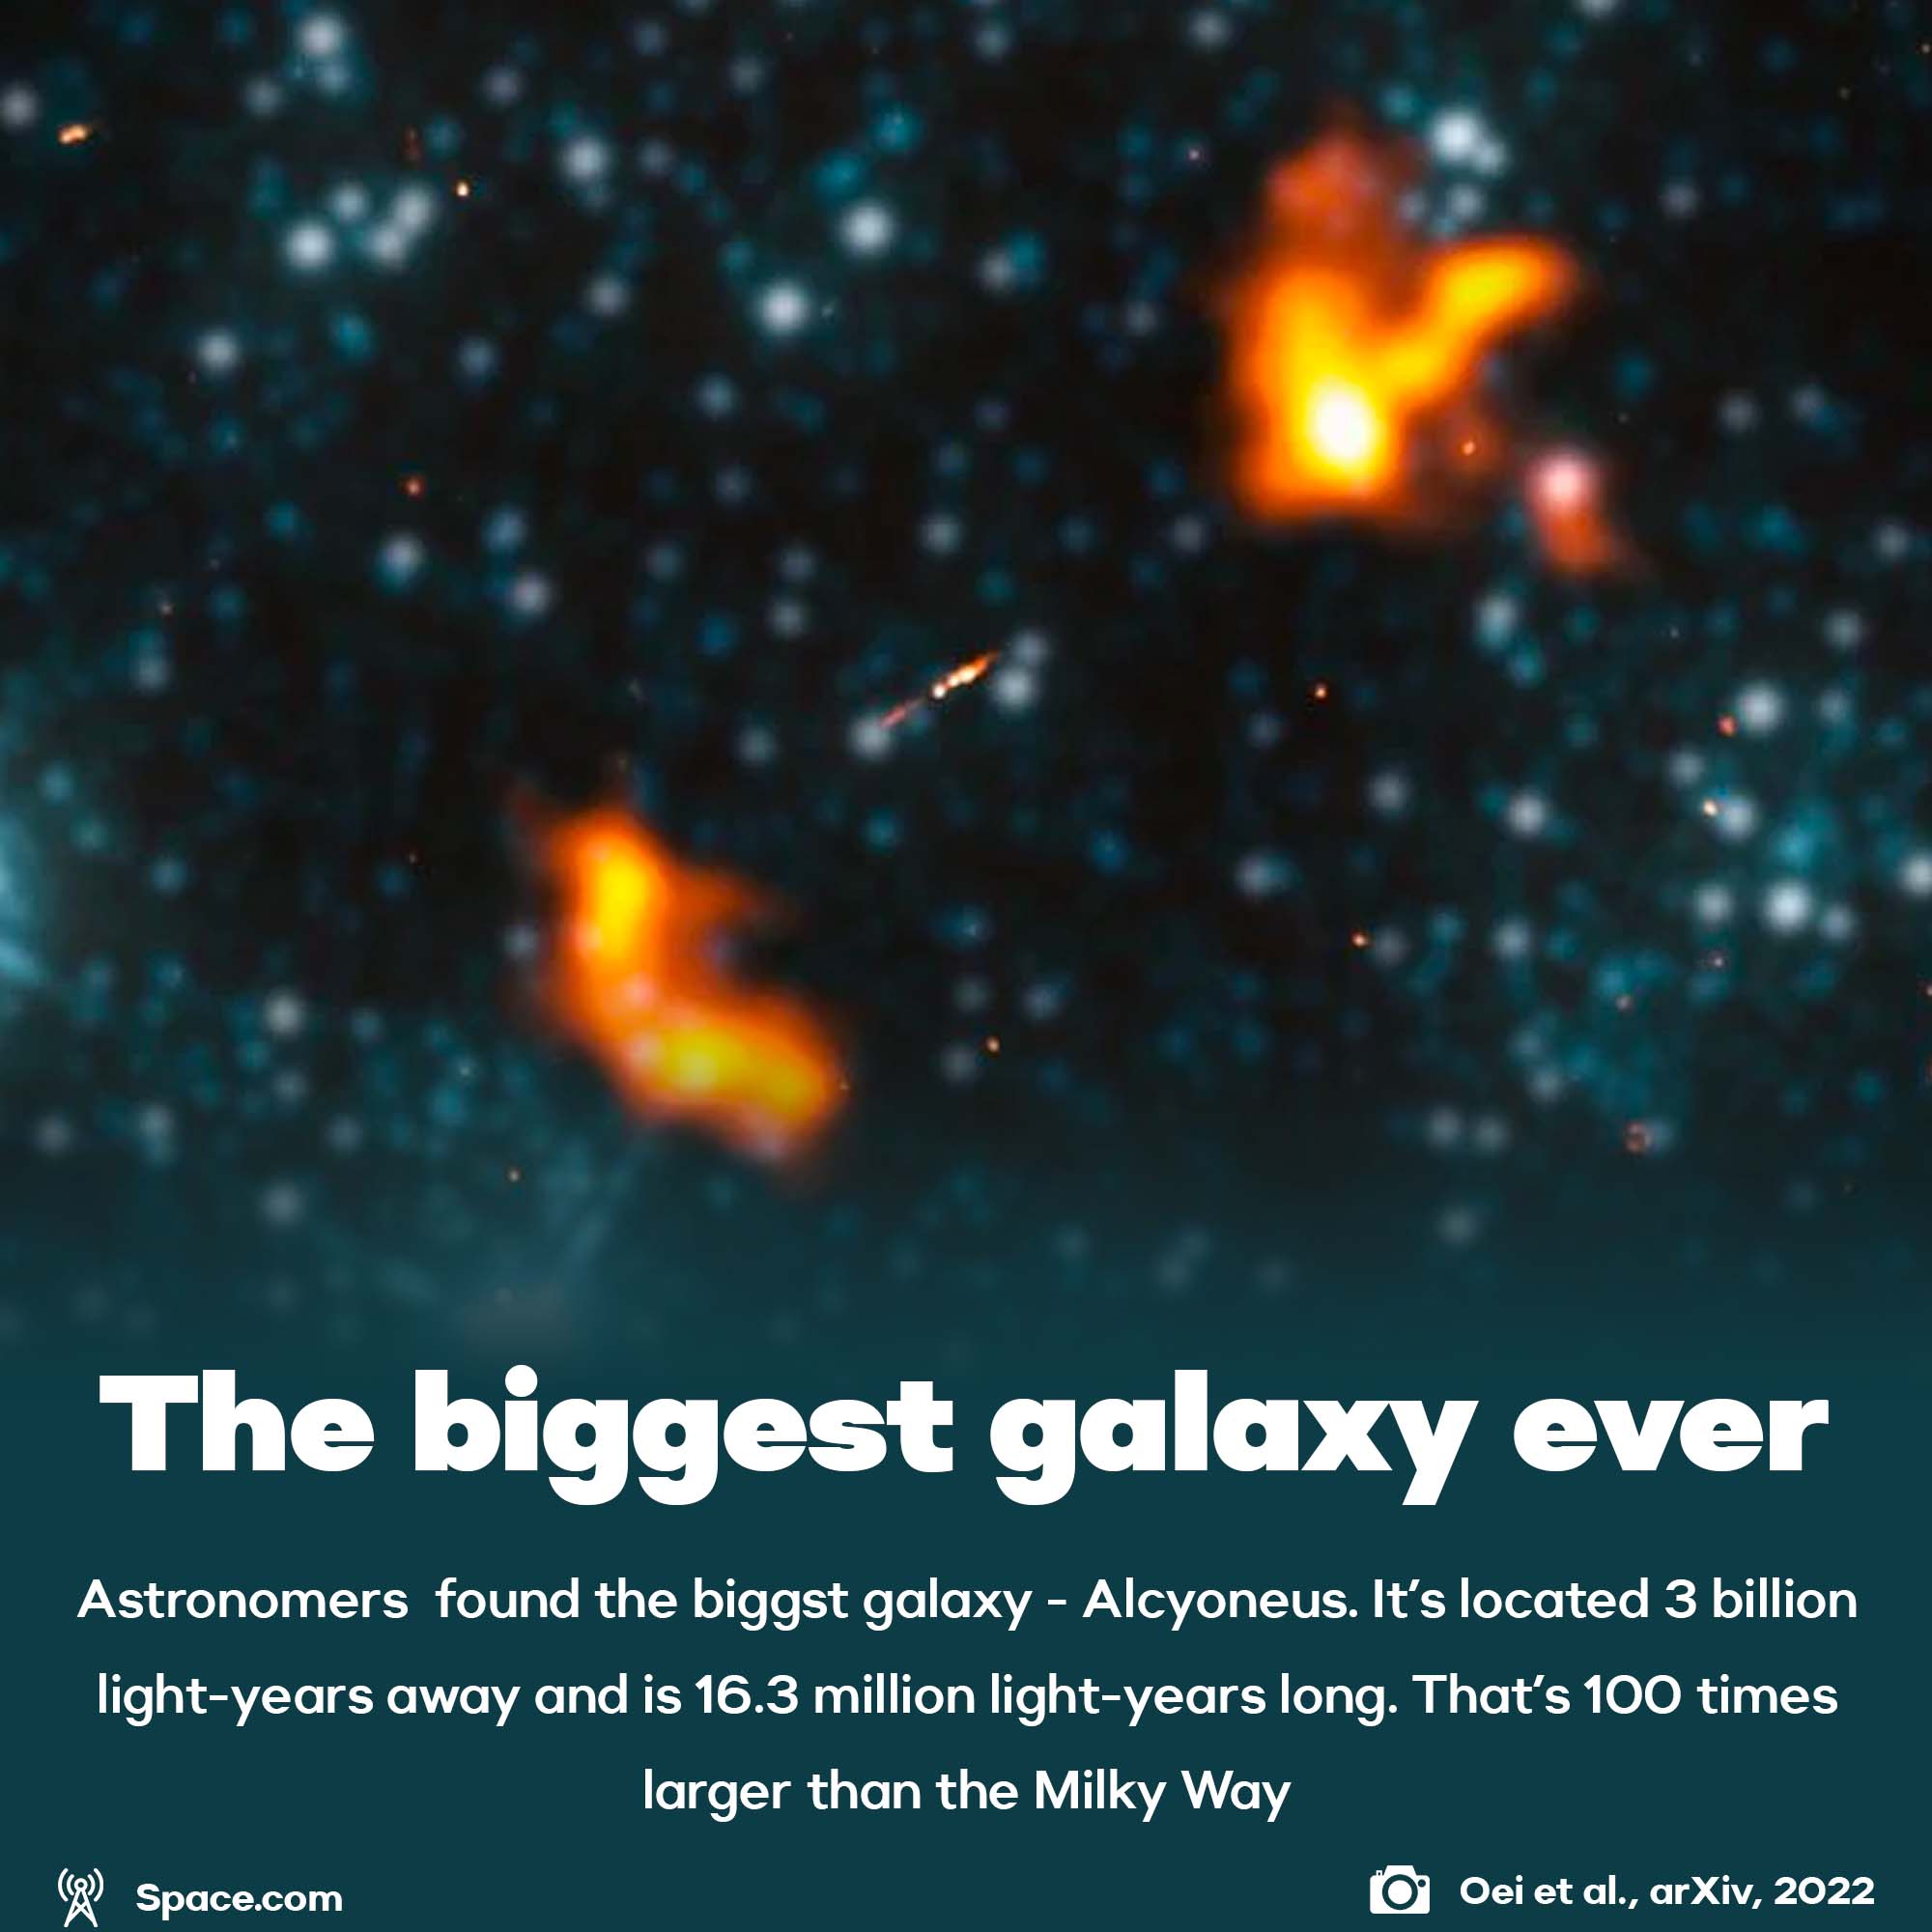 The biggest galaxy ever